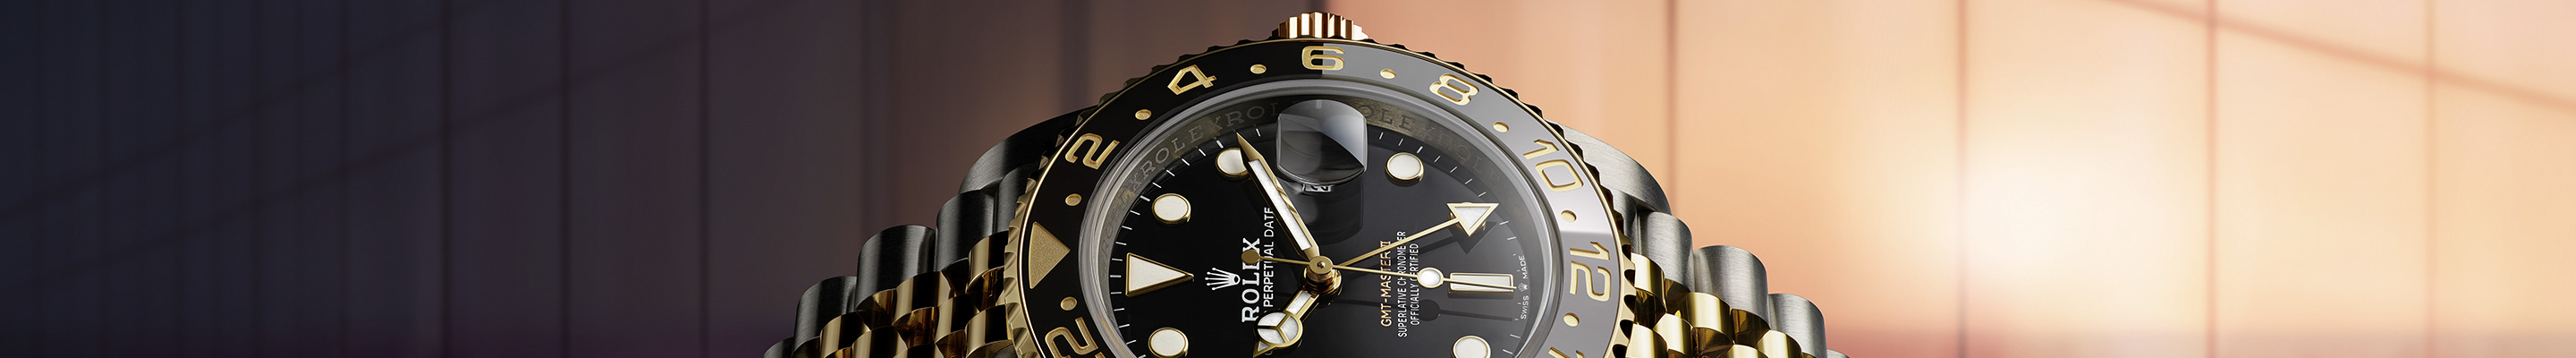 Rolex GMT-Master II in Oystersteel And Yellow Gold - m126713grnr-0001 at Kee Hing Hung